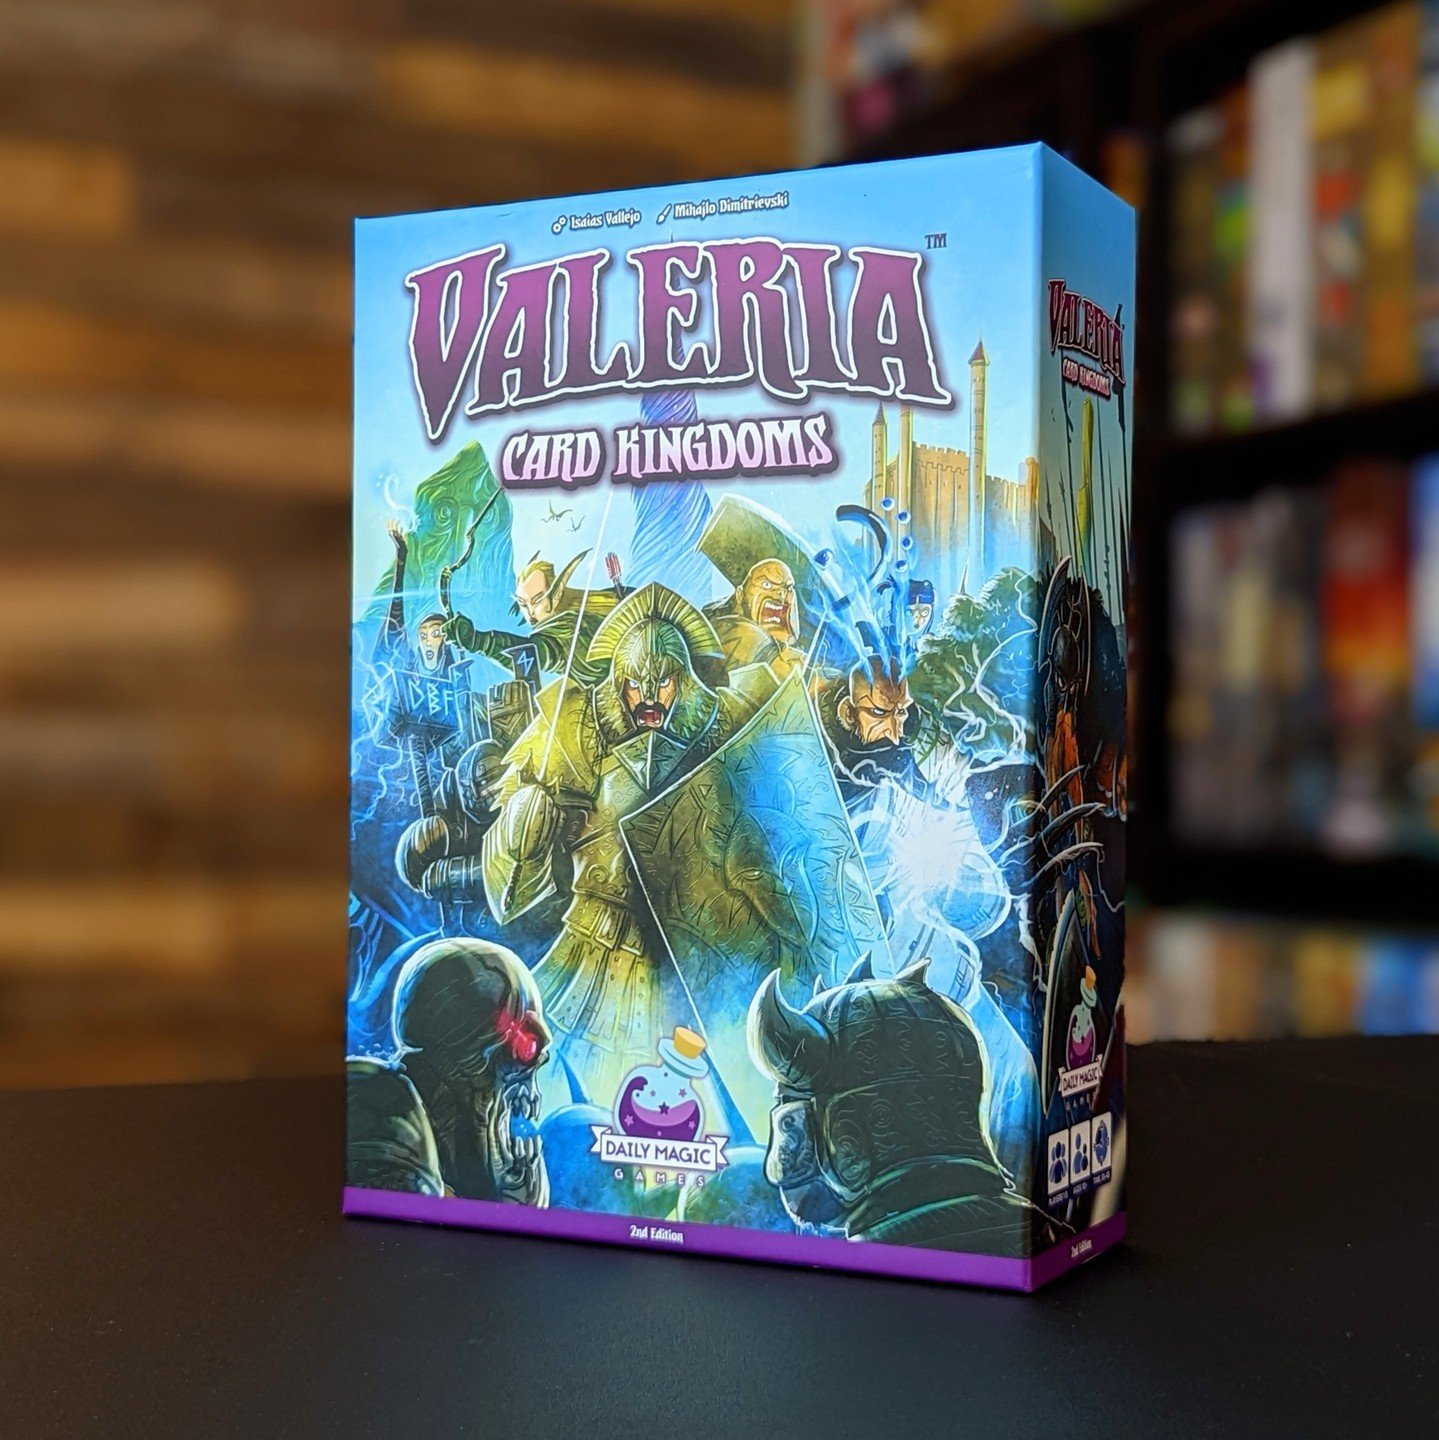 The one that started it all! ⚔️ Pick up a copy of Valeria Card Kingdoms today and receive 7 promo cards! https://buff.ly/3D9guOn